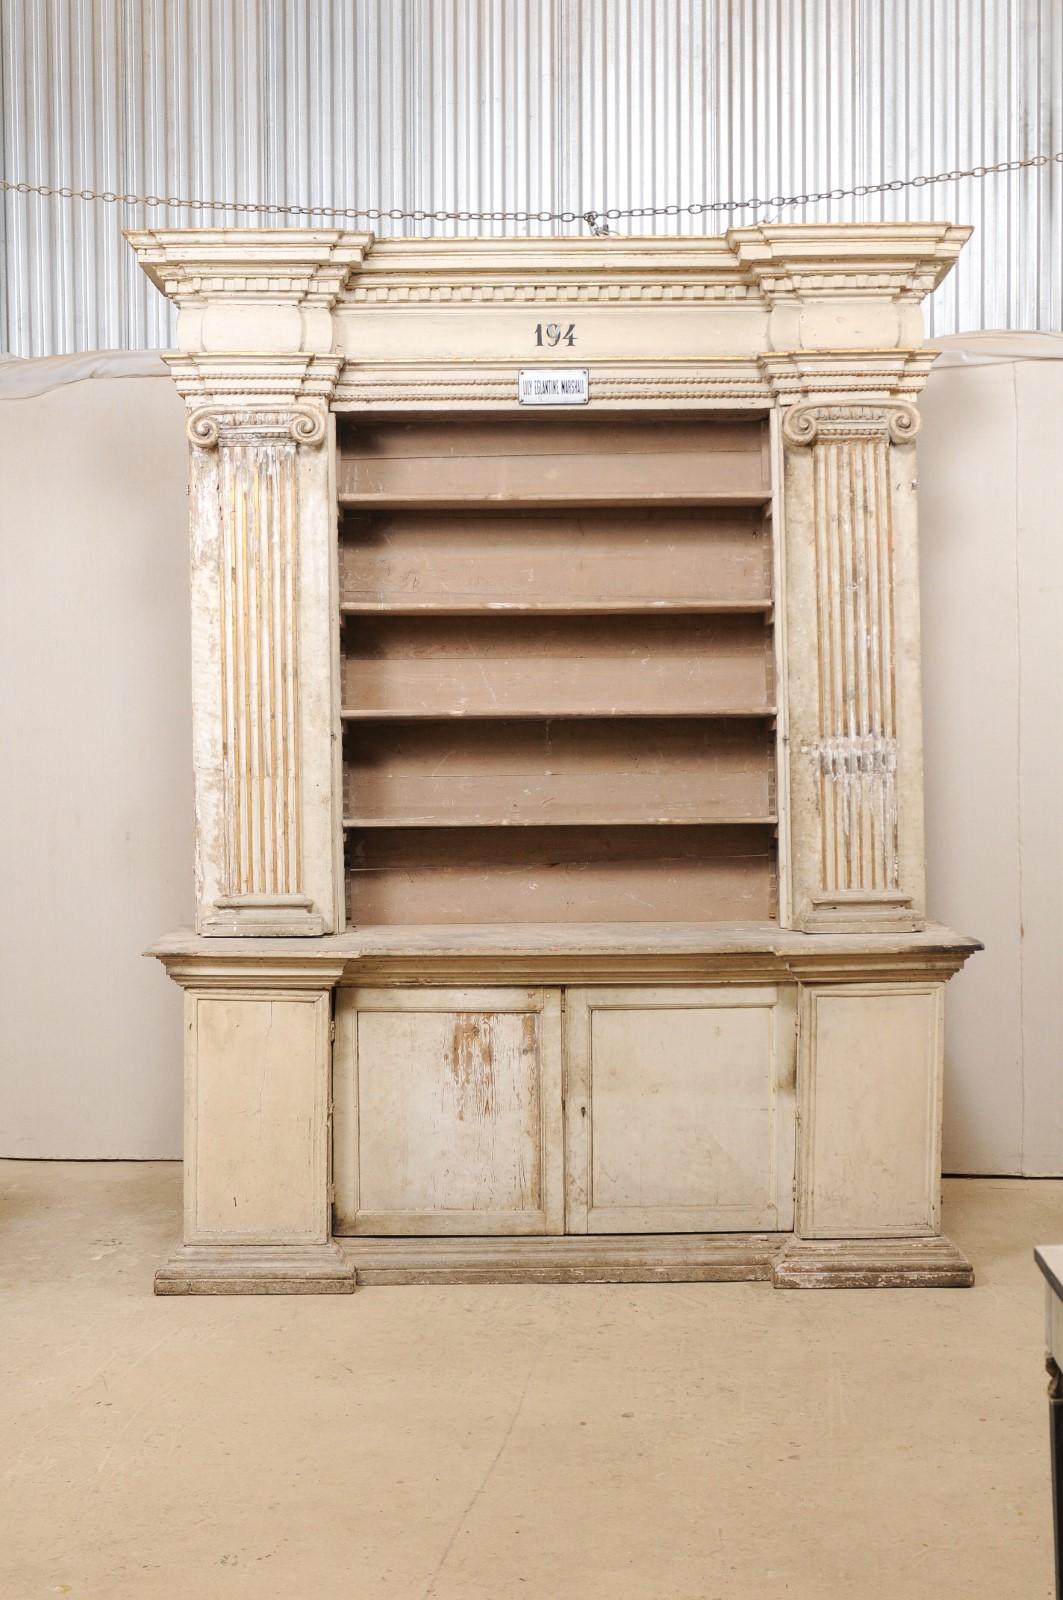 An 18th century open shelving display and closed storage cabinet from Italy, with fabulous Roman Ionic column details and retains it's original paint and gilt accents. This antique cabinet, which originally resided in an old church in Italy, is very